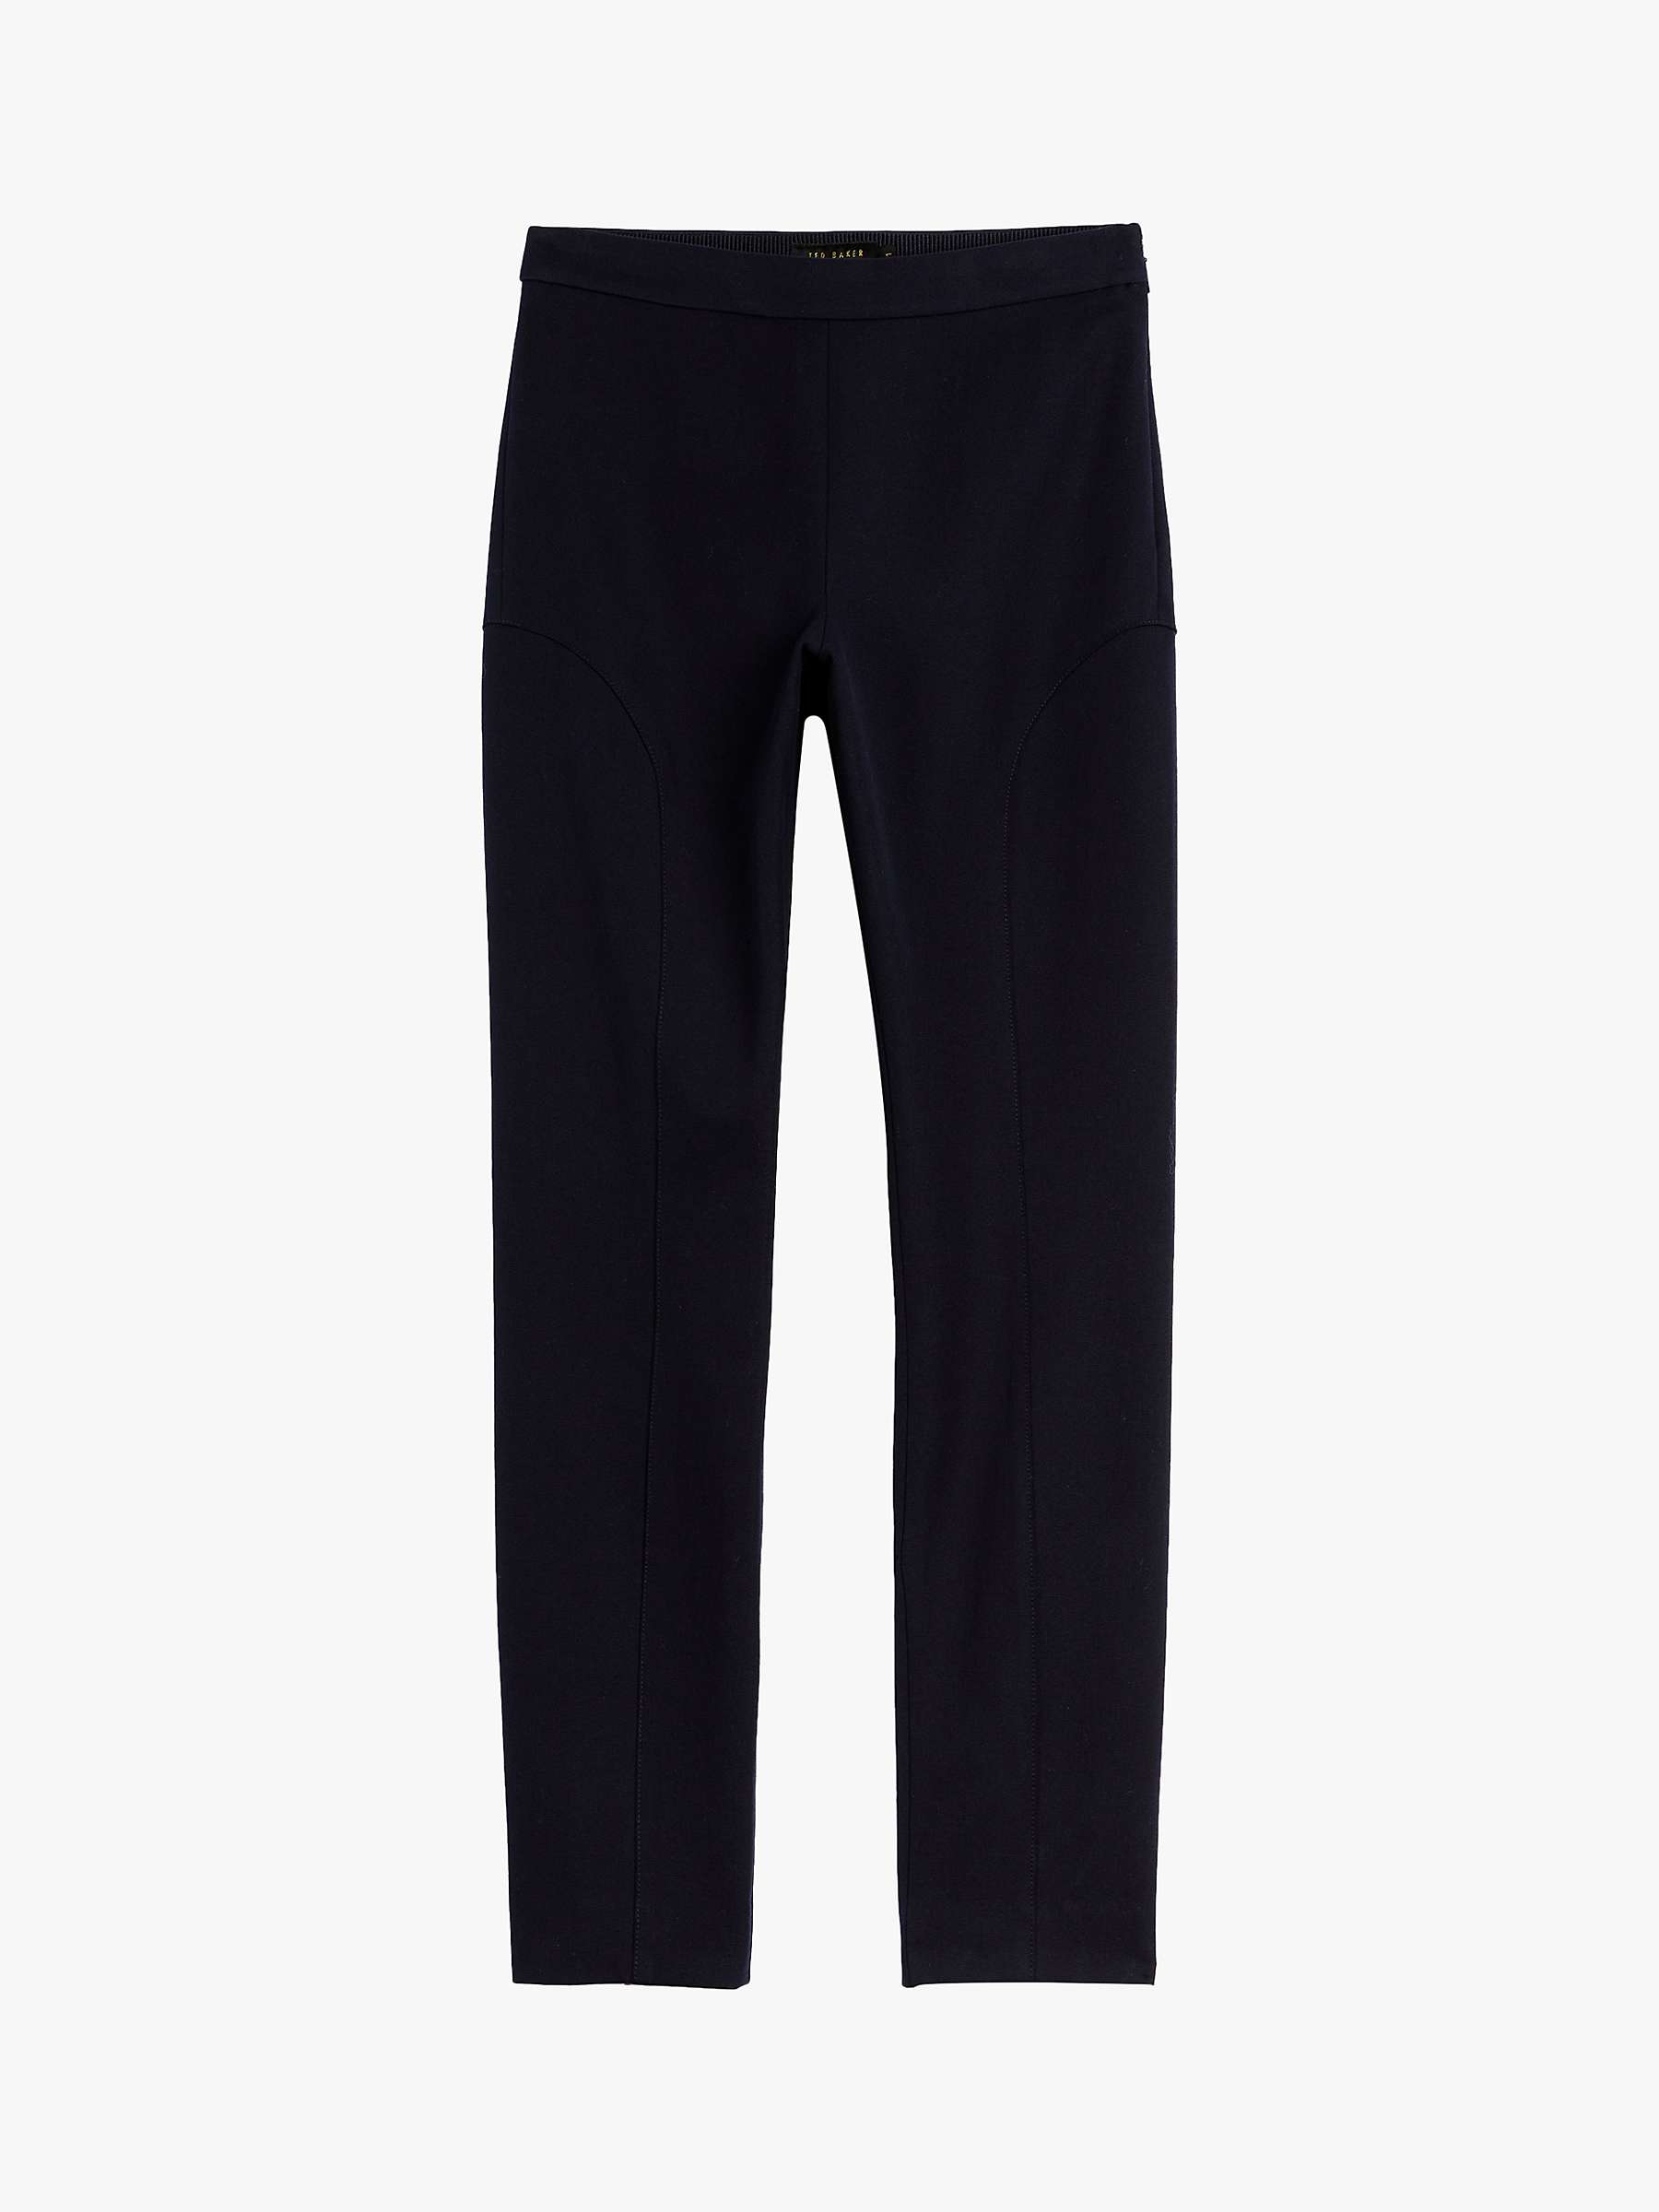 Buy Ted Baker Calya Ankle Grazer Trousers Online at johnlewis.com